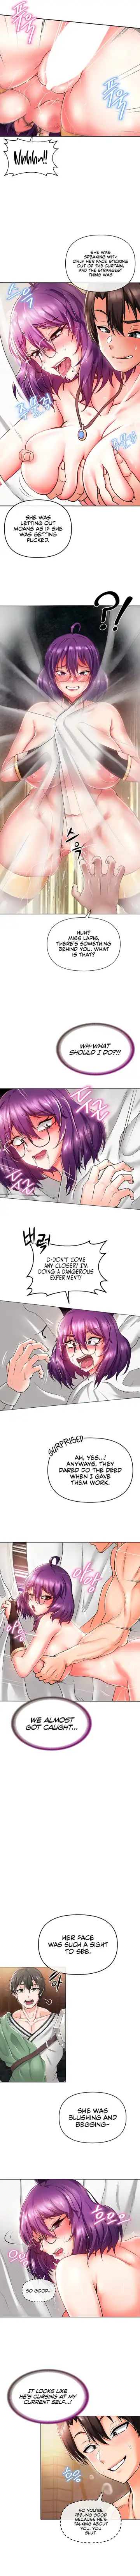 Welcome to the Isekai Convenience Store Fhentai.net - Page 40